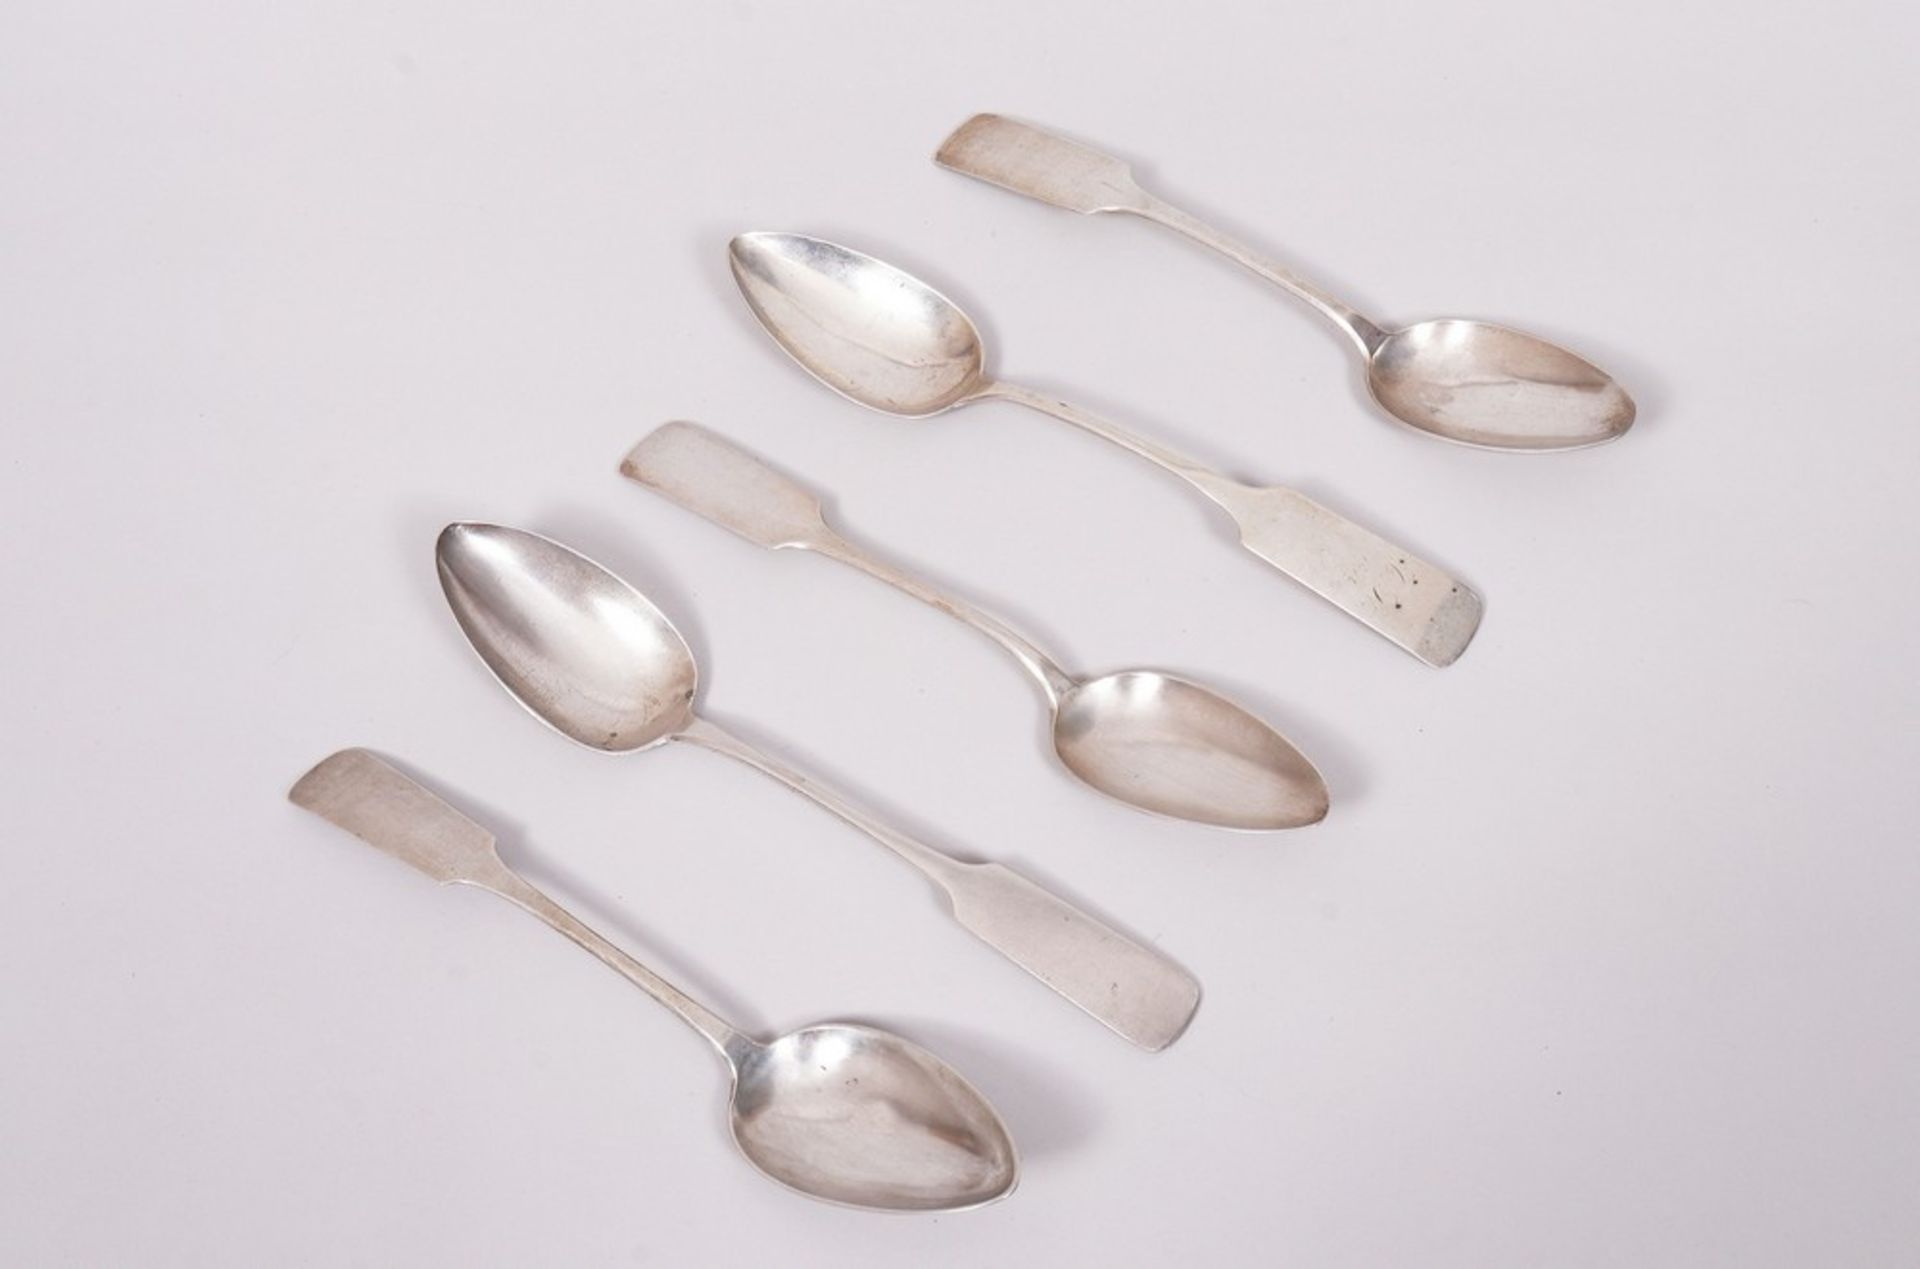 5 dining spoons, 750/800 silver, Hermann Georg Sack, Lübeck, late 19th C.